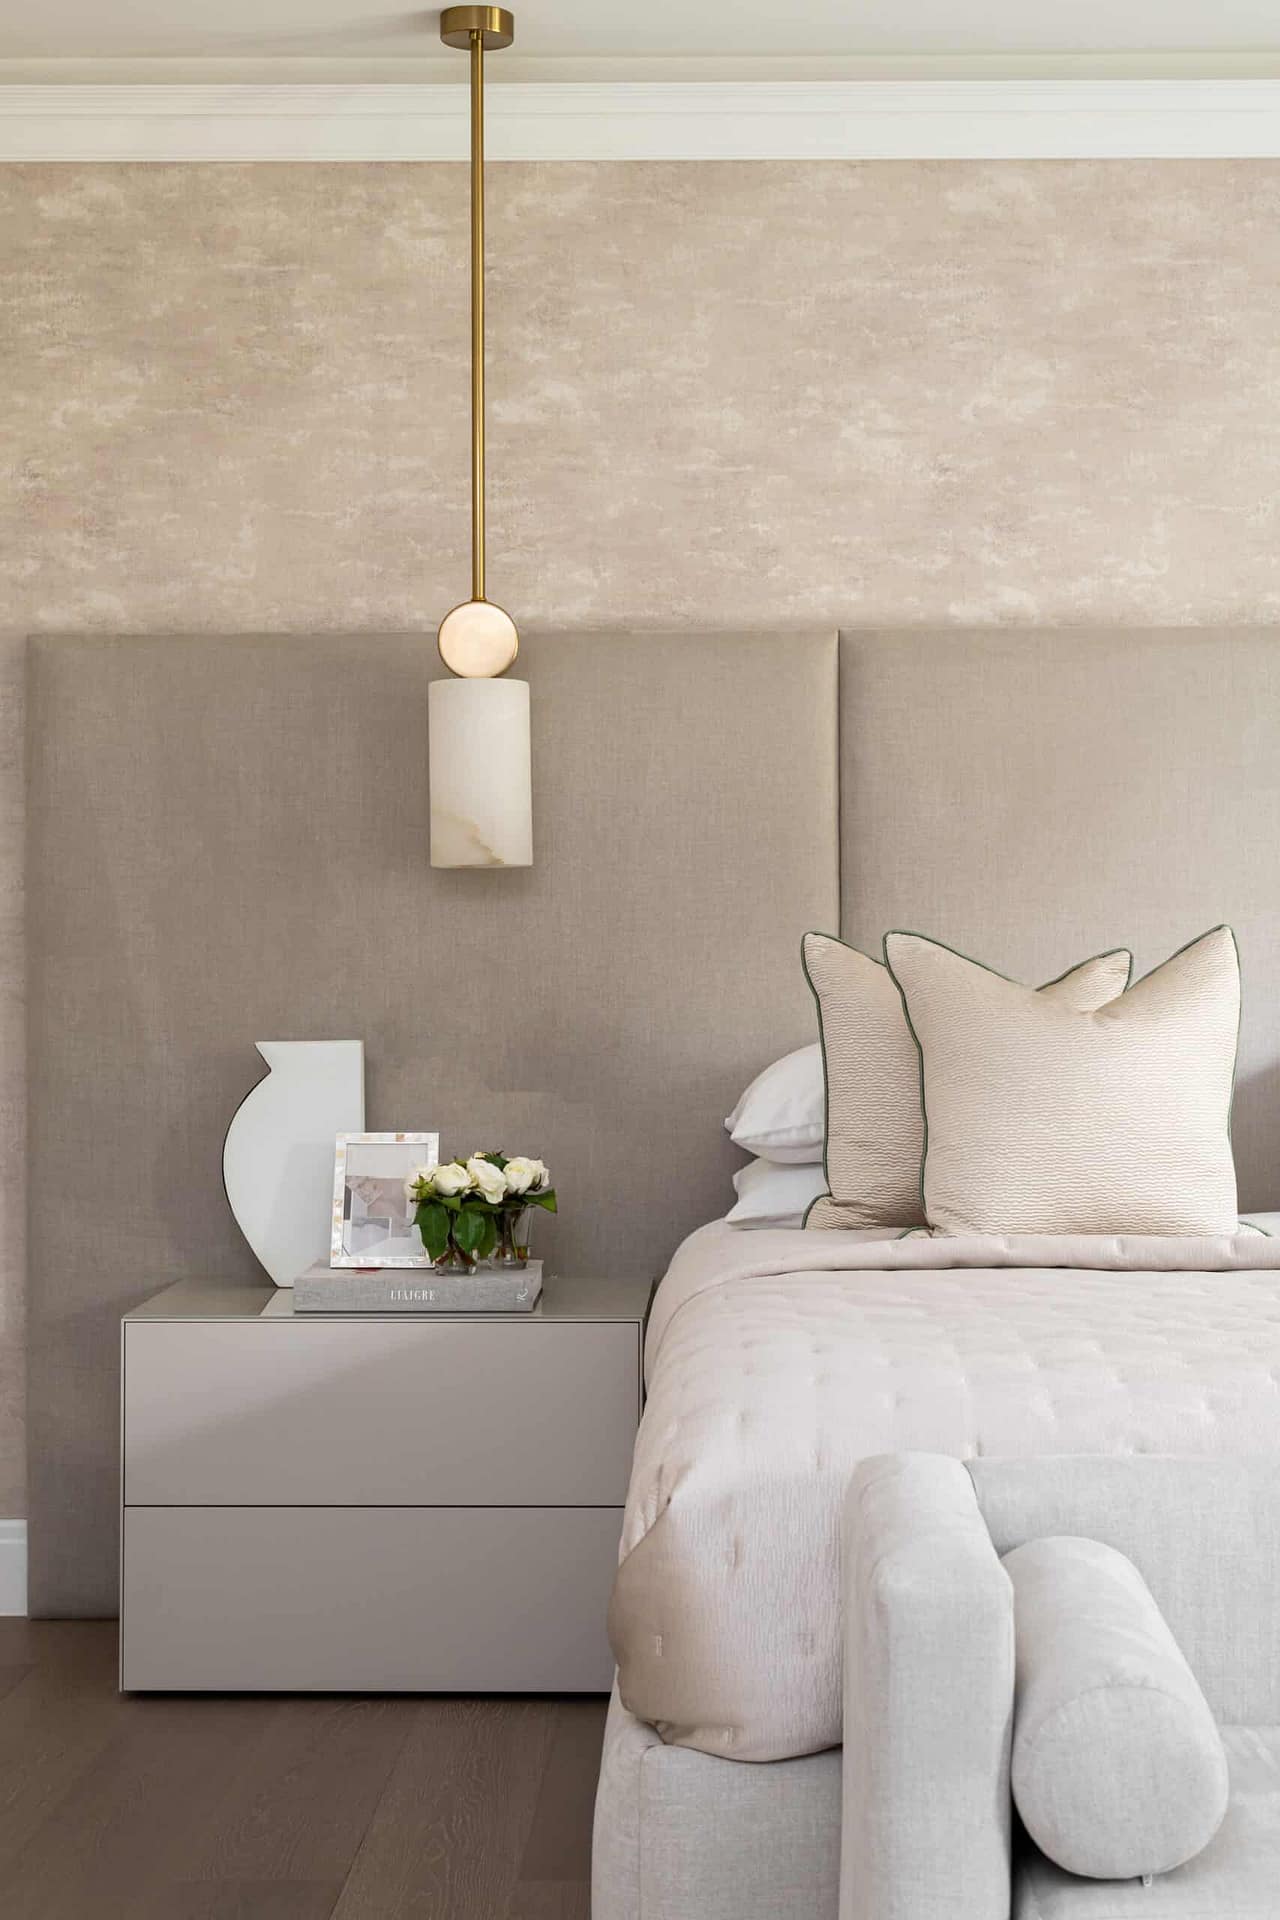 Interior Designers in Wimbledon designed this bedroom with exceptional bedside pendants.